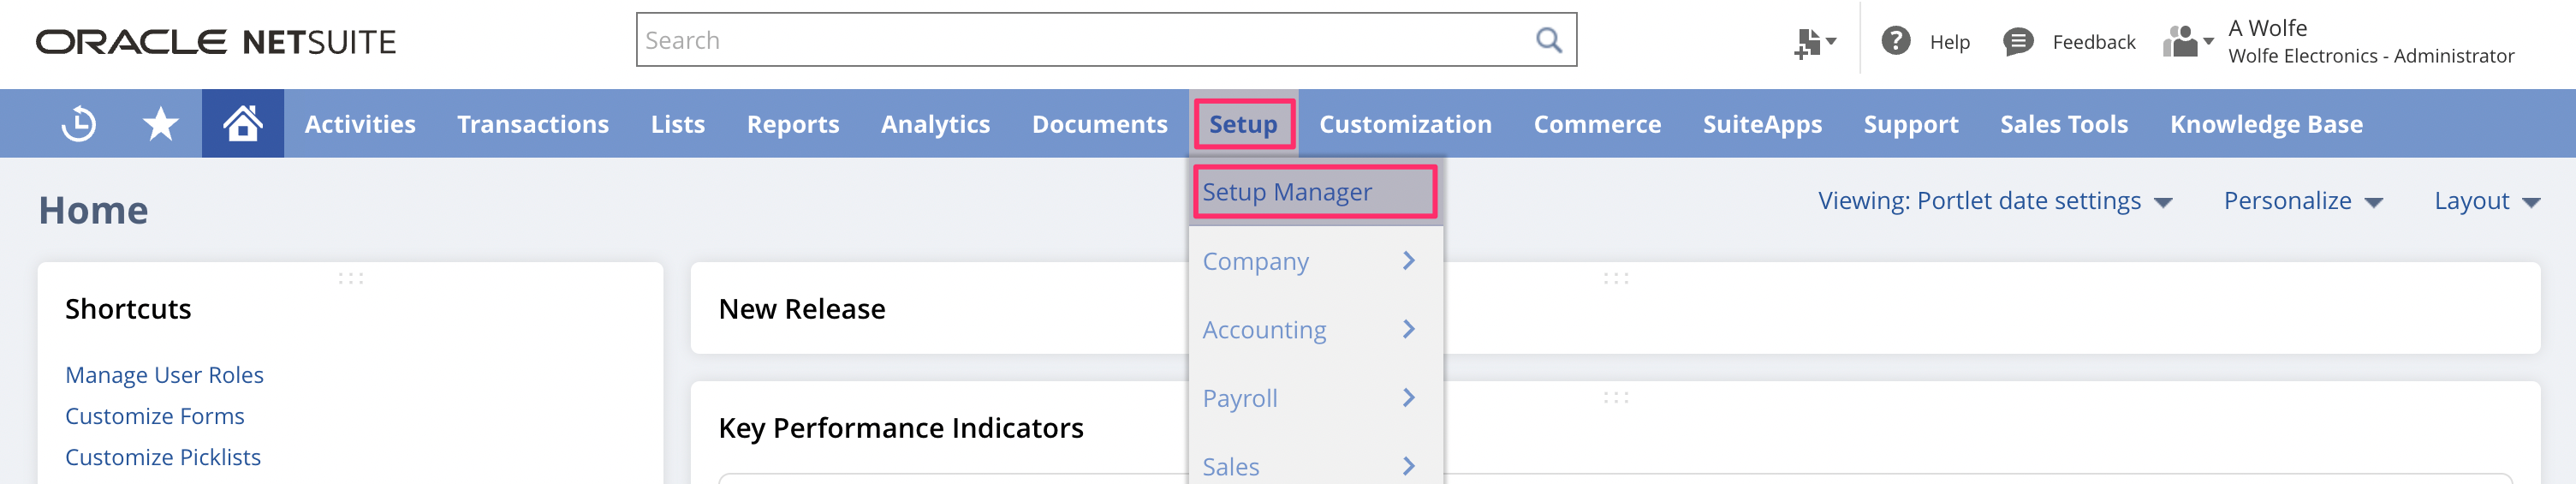 NetSuite_Perms_UI_Setup-Manager.png